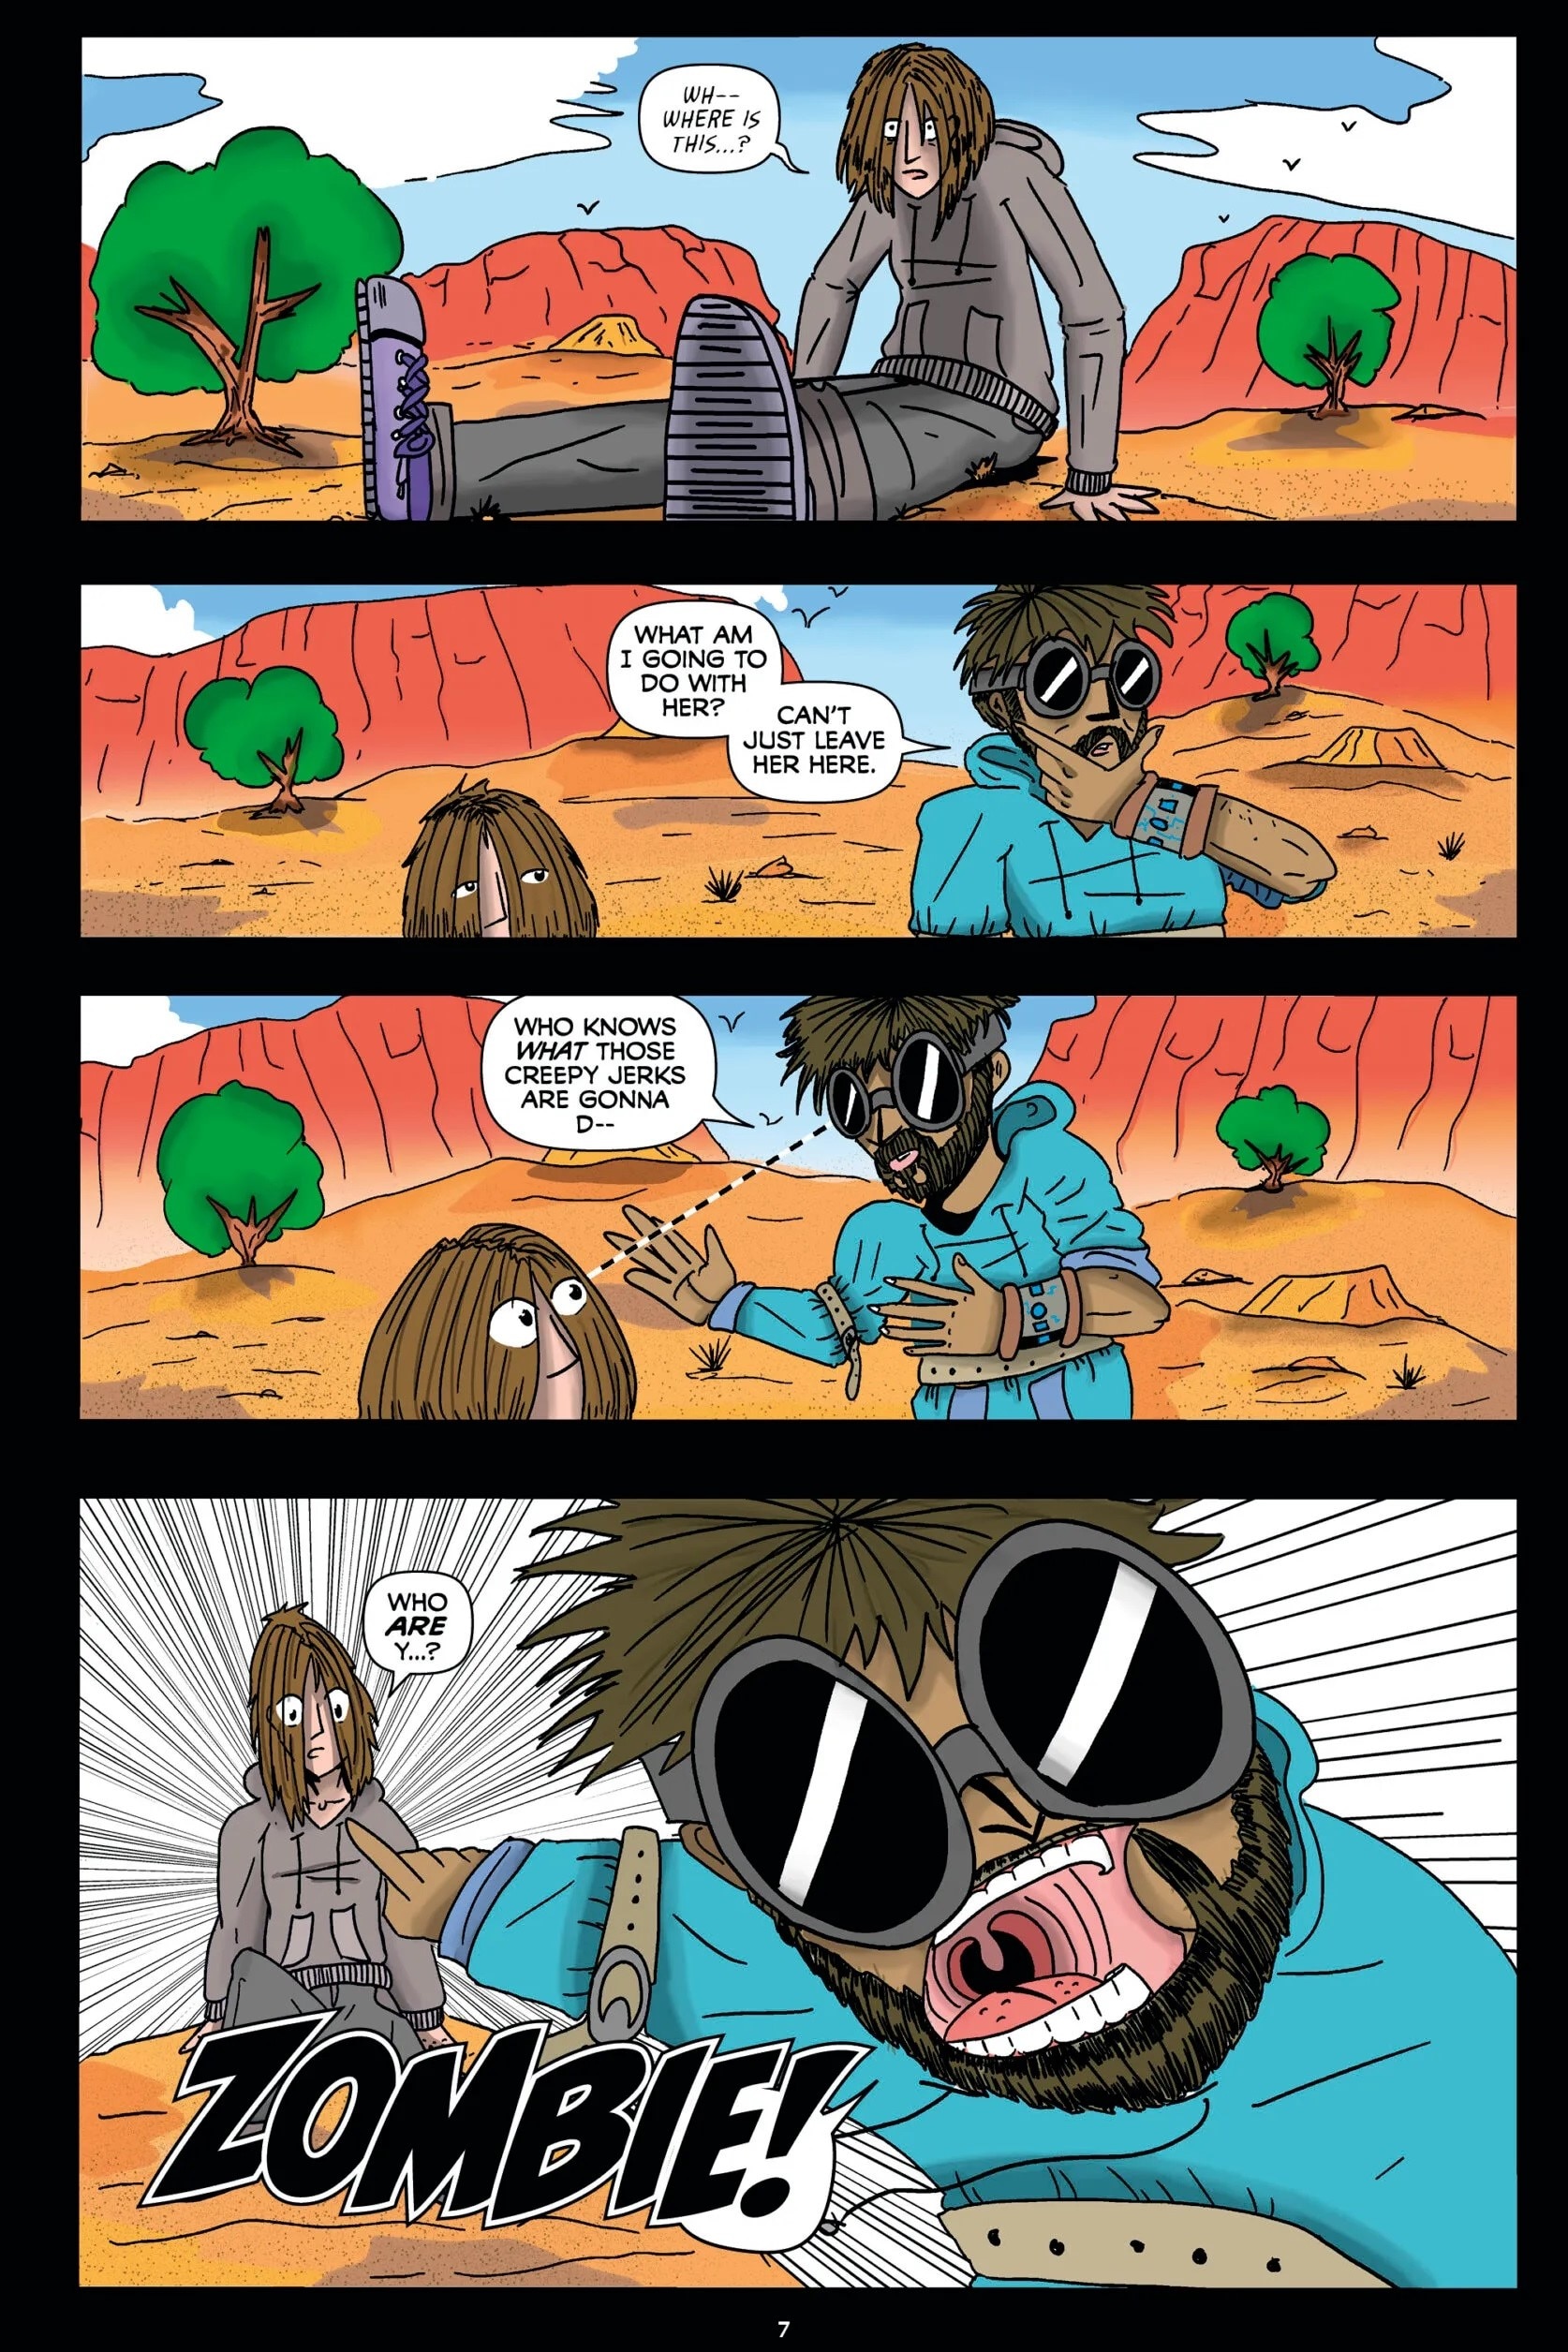 Comic book panels with characters, set in the desert.